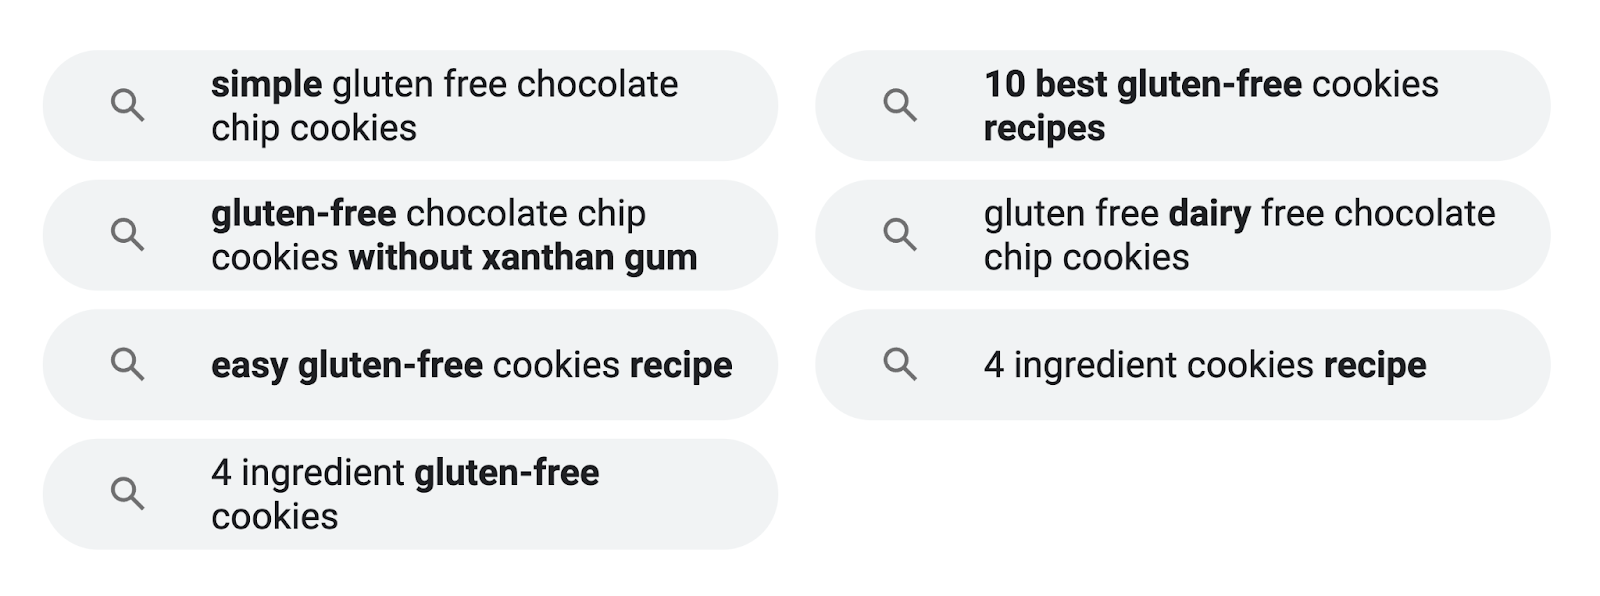 Google’s “Related searches” section for "4 ingredient gluten-free chocolate chip cookies"